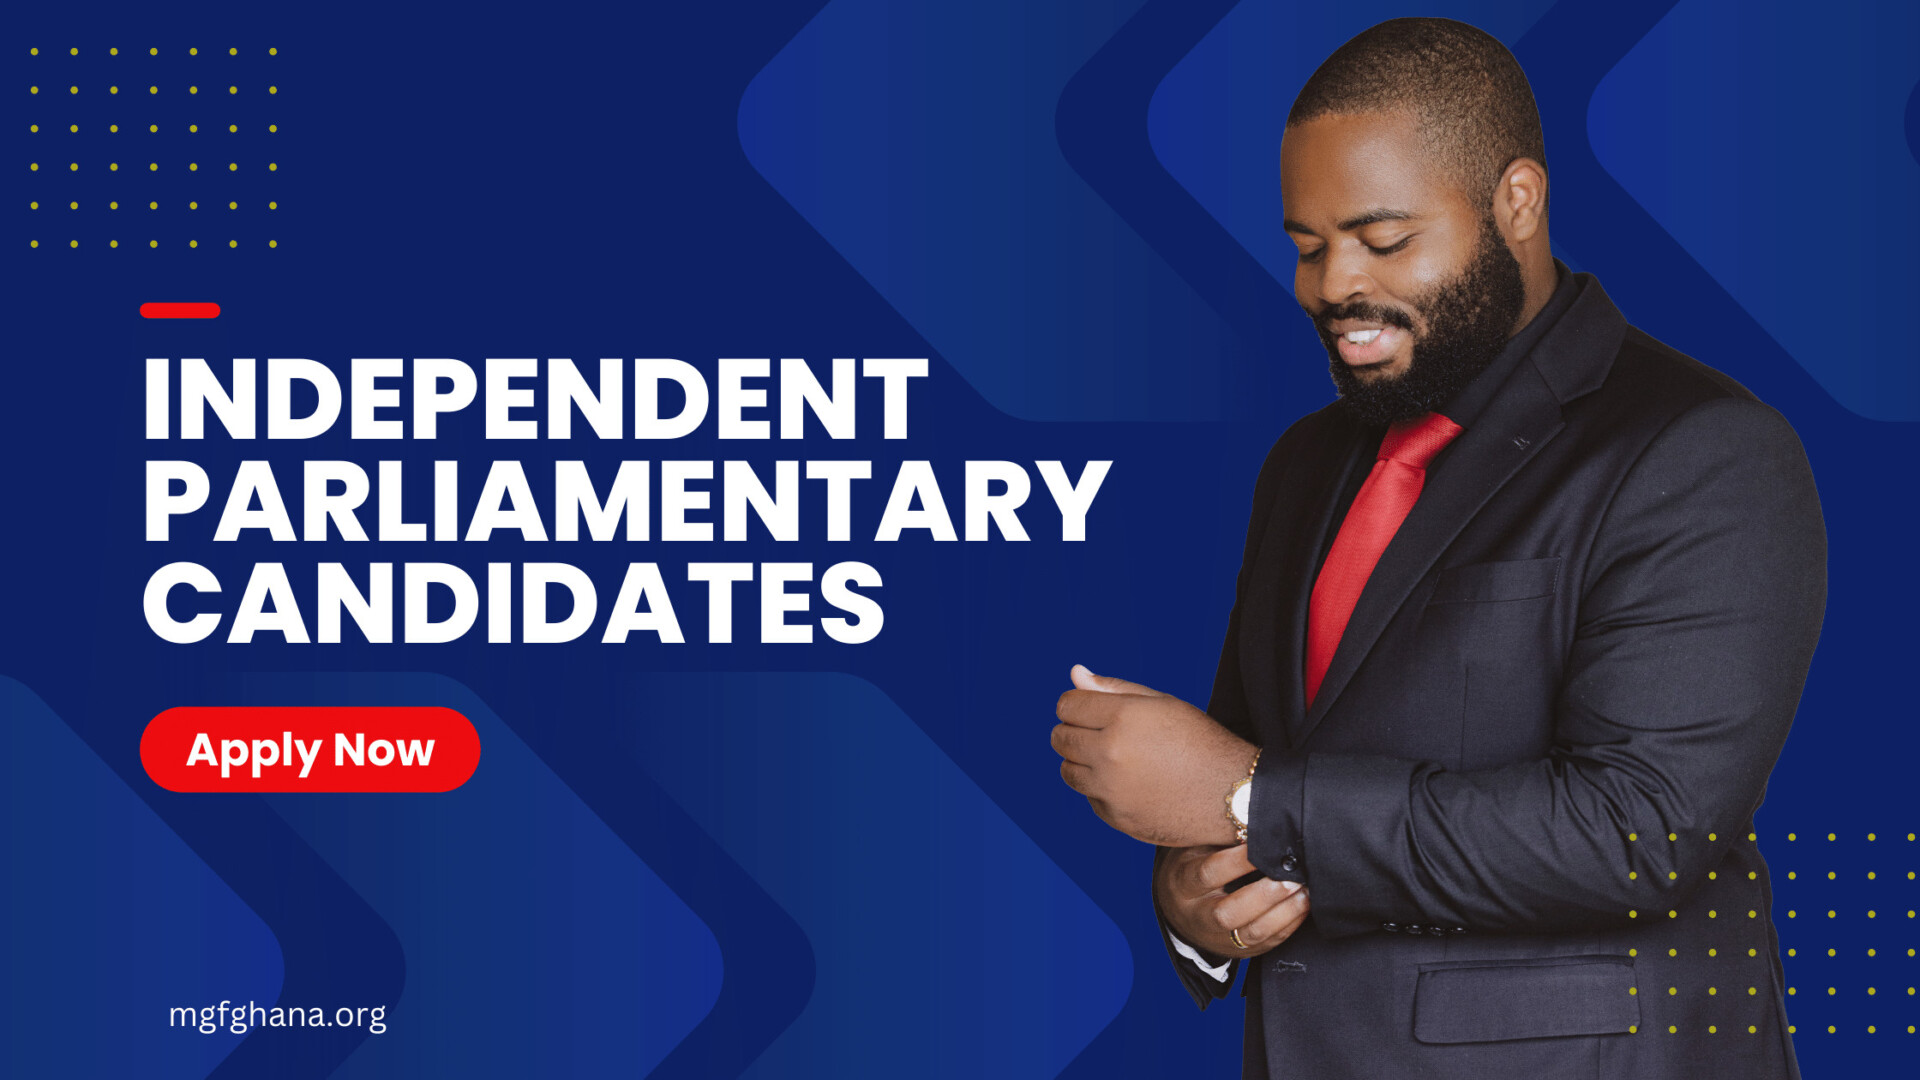 Independent Parliamentary Candidates Application at MGF Ghana